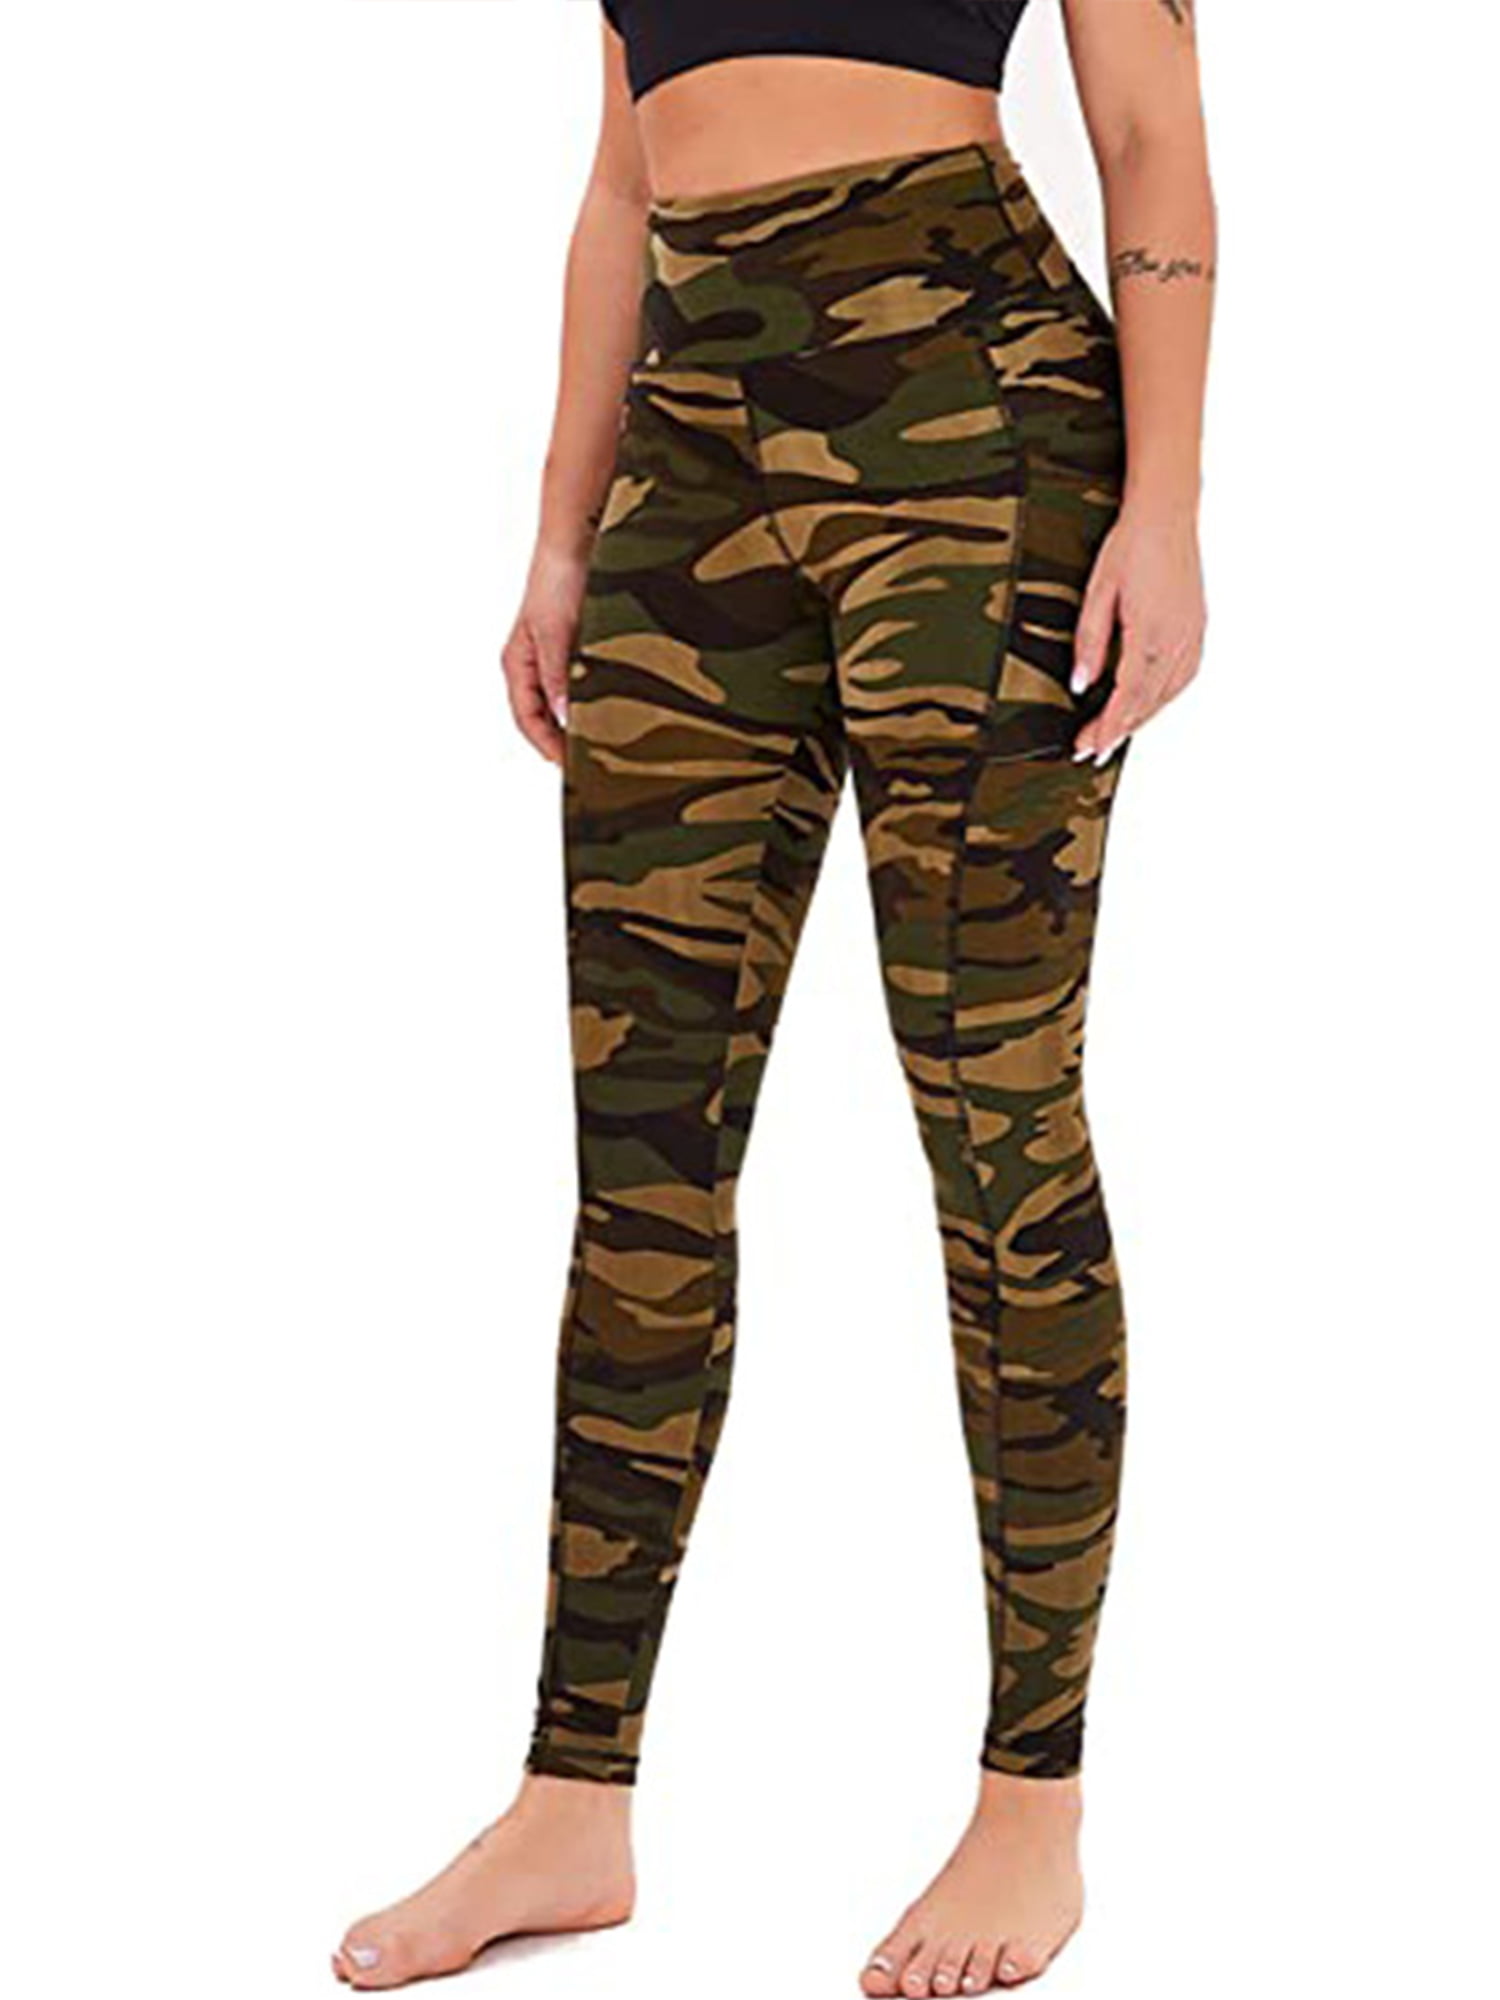 Womens Camouflage Fitness Sports Skinny Leggings Gym Running Stretch Pants